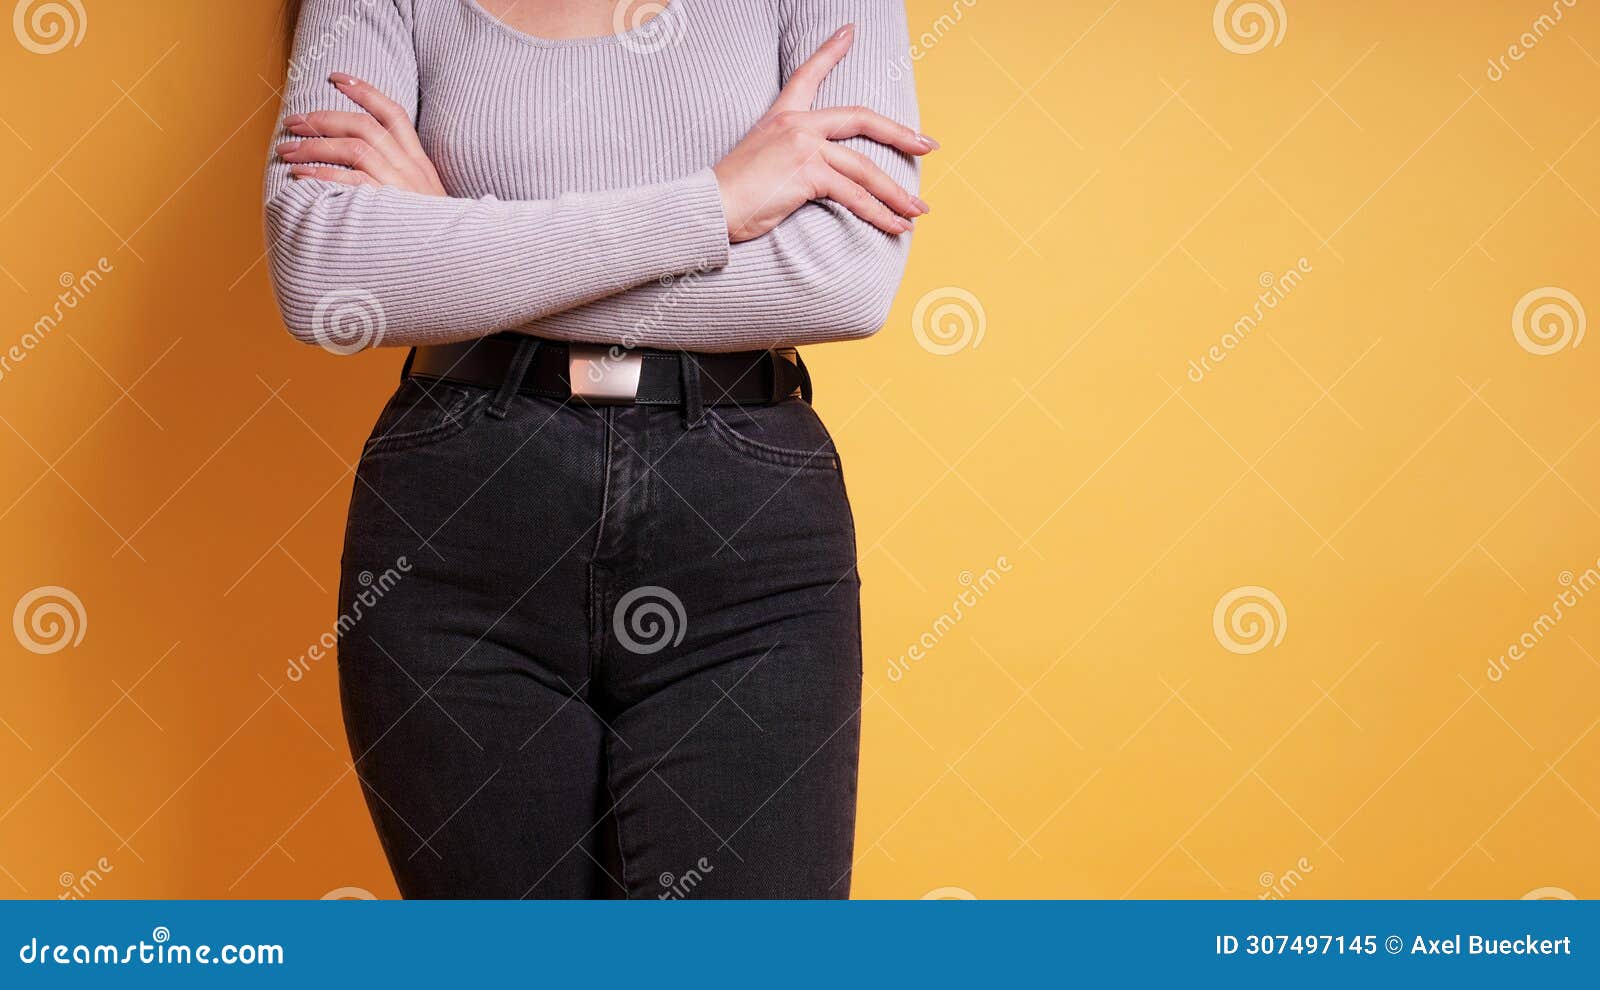 https://thumbs.dreamstime.com/z/midsection-woman-wearing-tight-black-jeans-unrecognizable-young-307497145.jpg